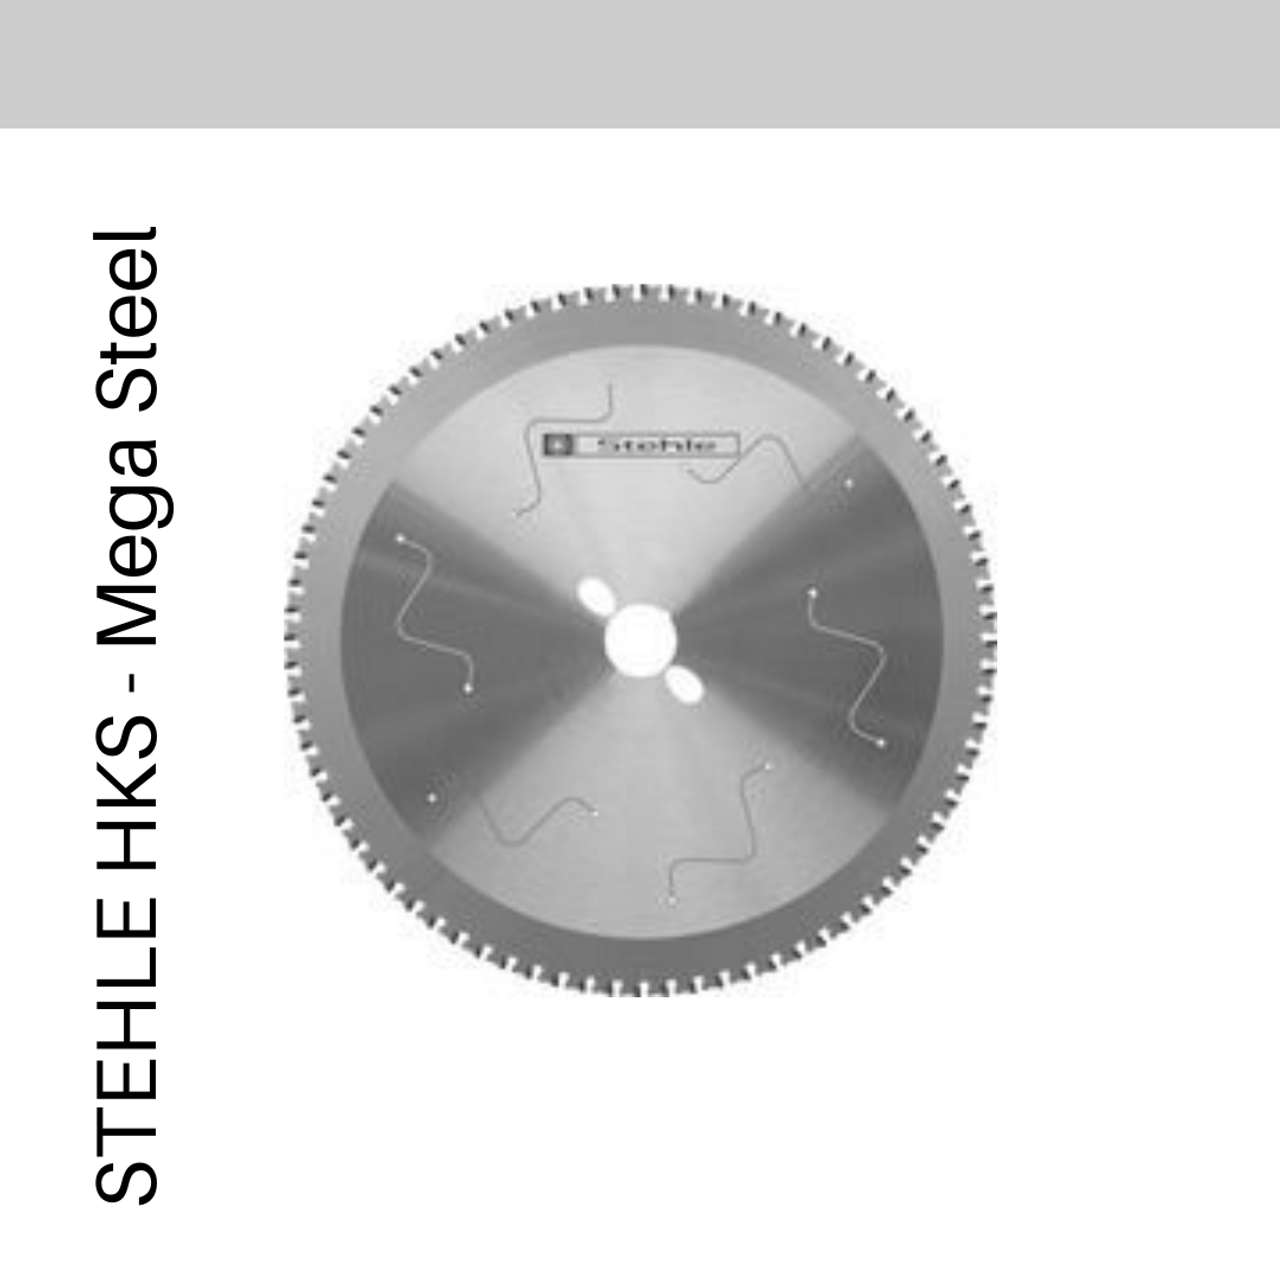 Craftsman Hardware supplies STEHLE HKS Mega-Steel ⌀230 x 30 Saw Blade for Steel with TR-F for the Construction Industry and Operators in Boronia, Ferntree Gully and Kilsyth